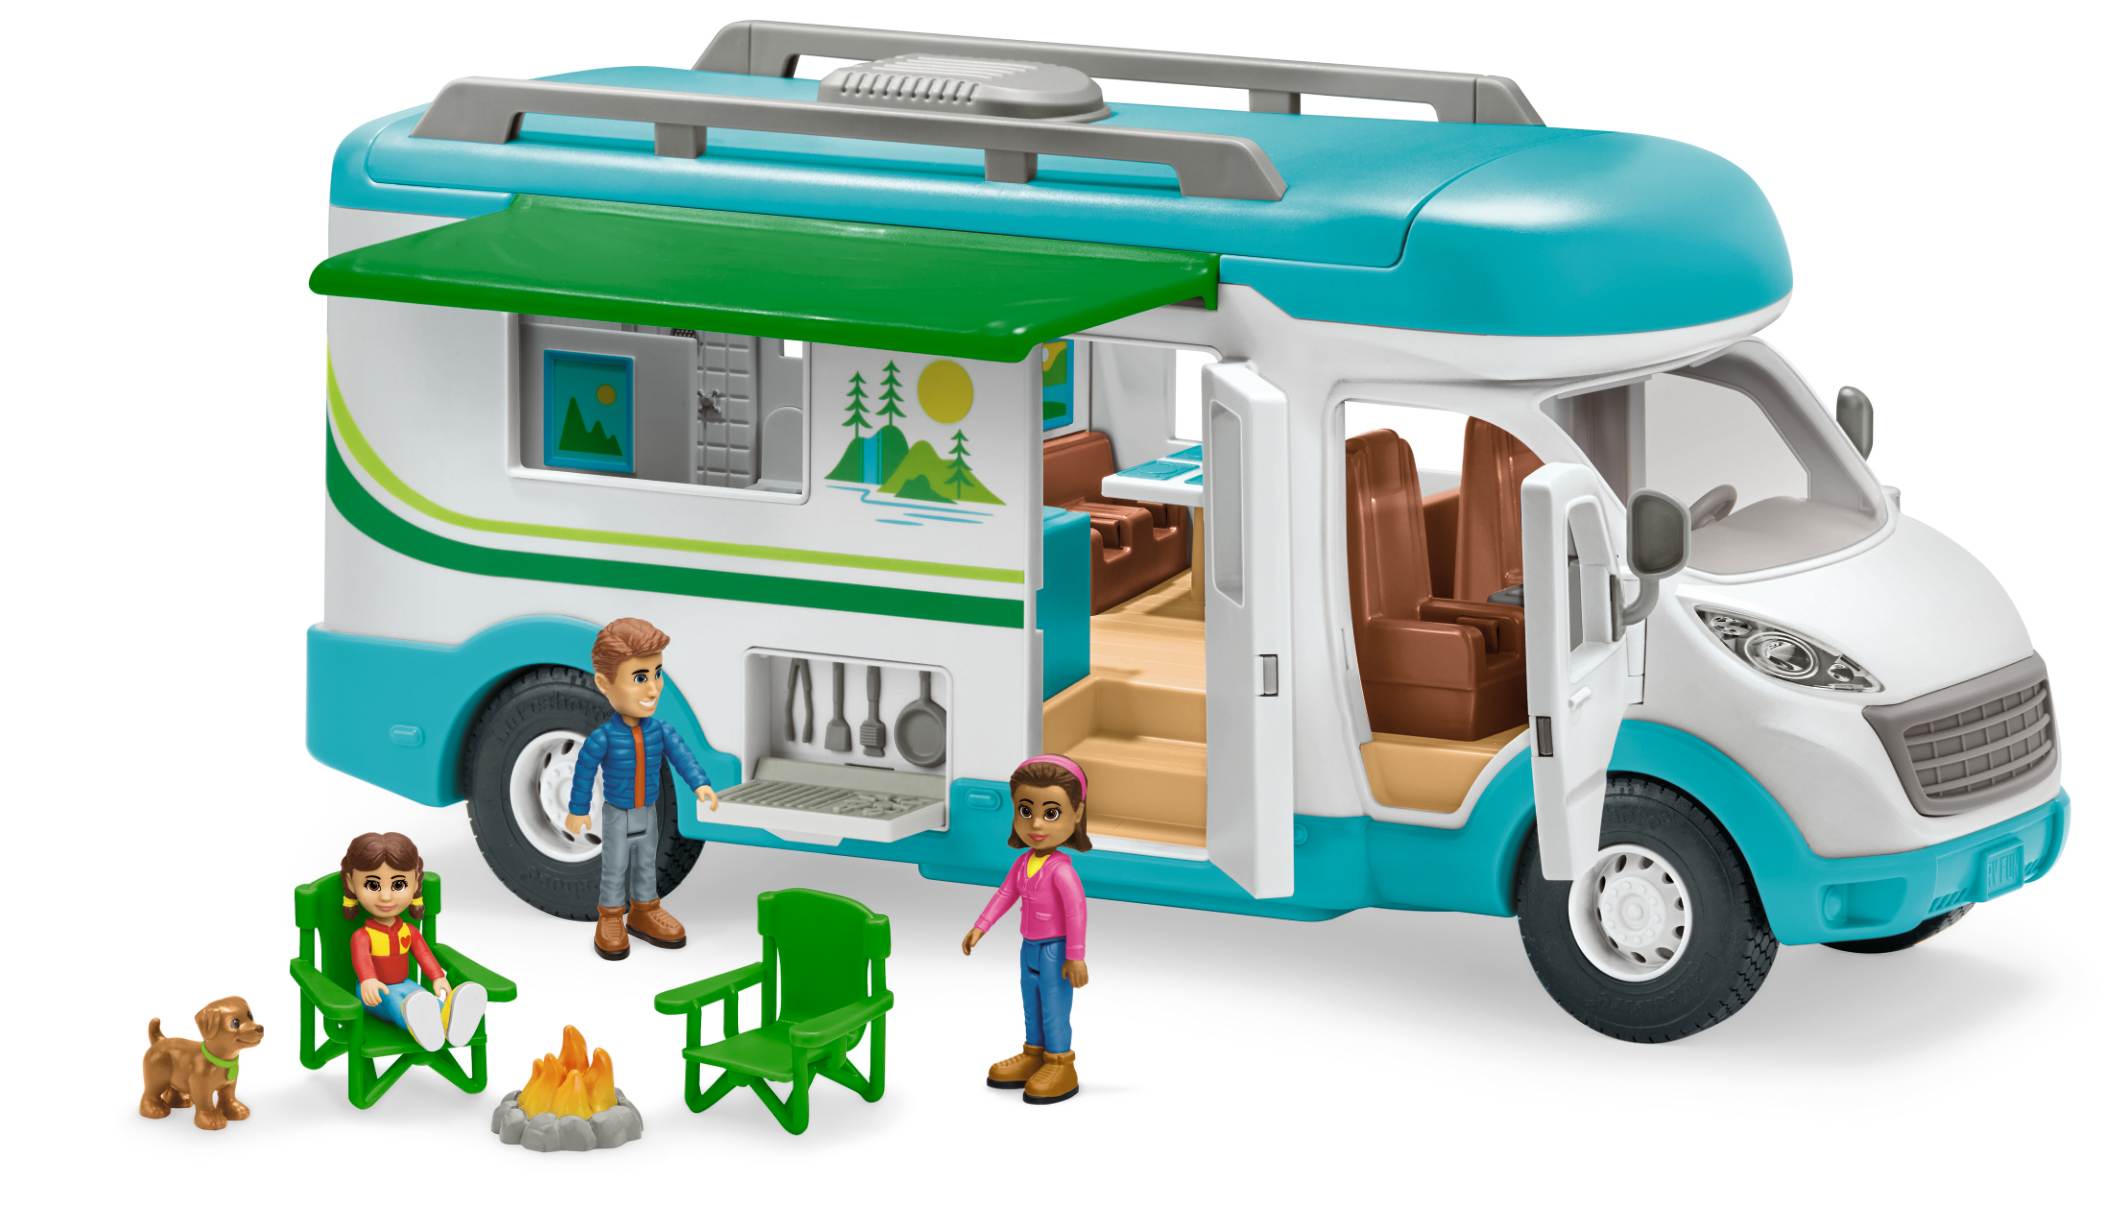 Explore the Outdoors! Travel Camper